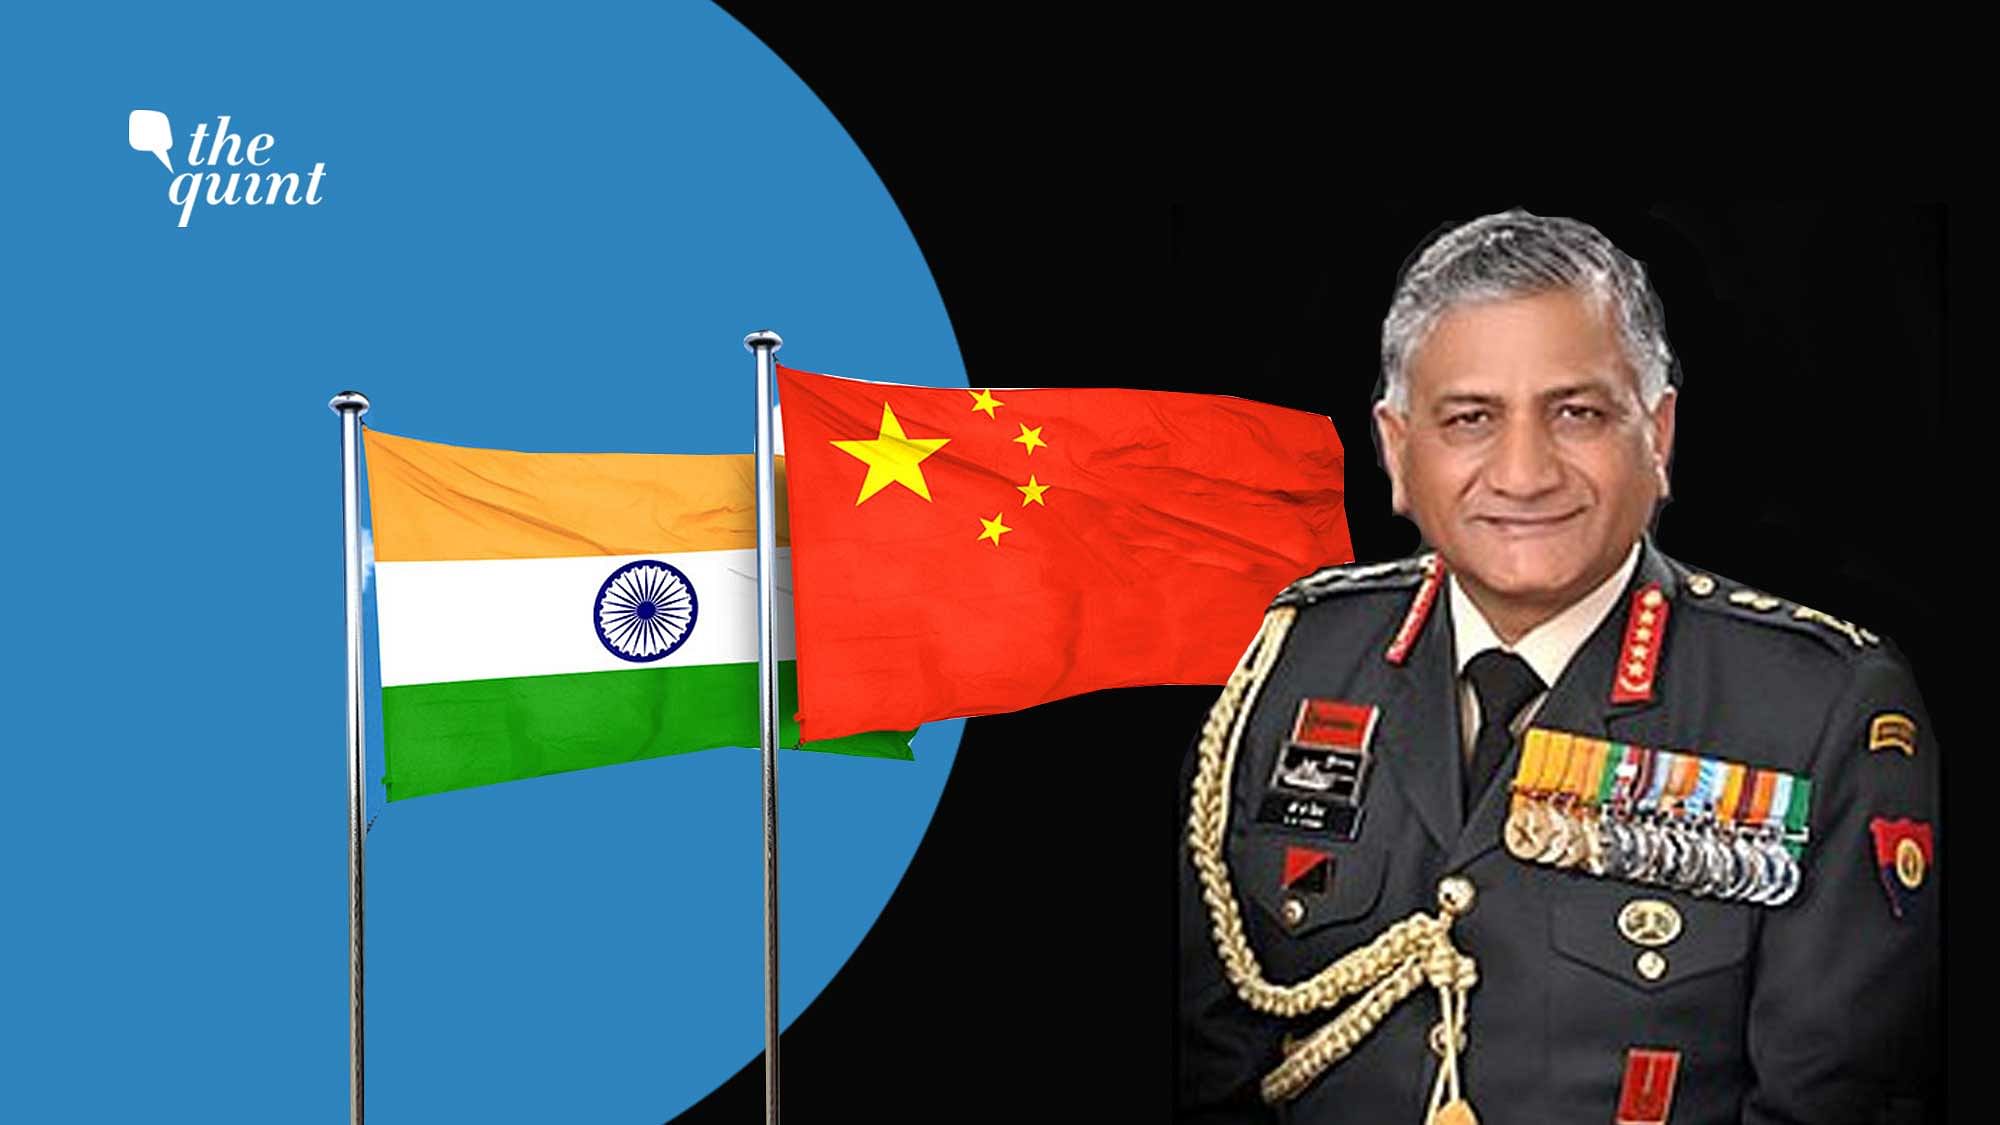 Image of India’s and China’s flags, and (Retd) Gen VK Singh, used for representational purposes.